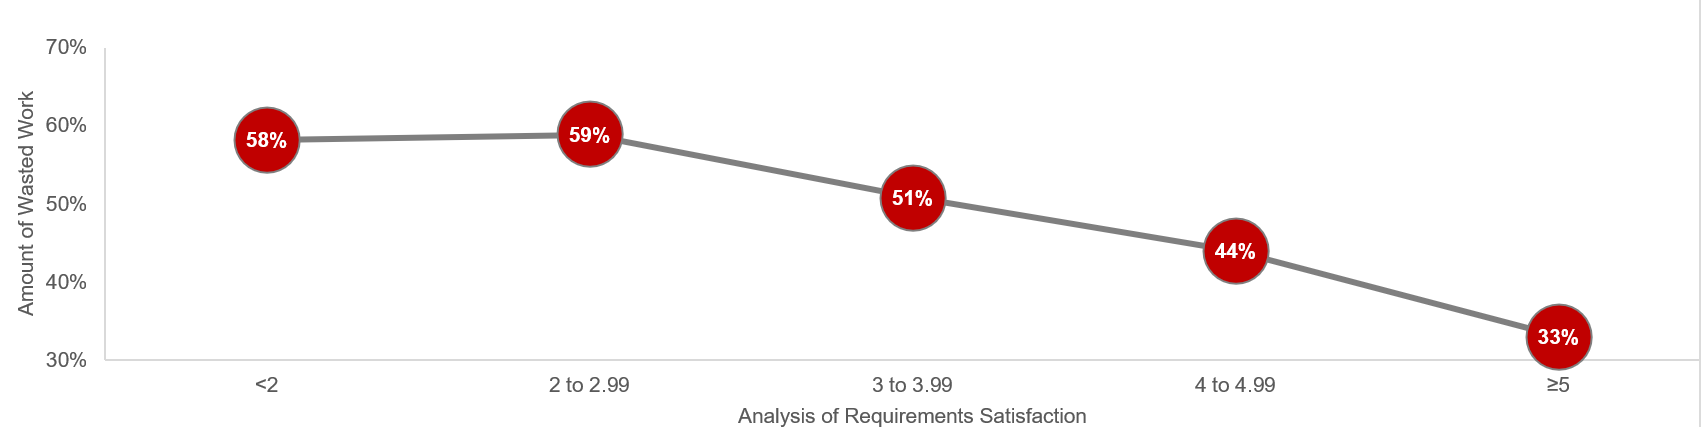 A line graph demonstrating that as the Amount of Wasted Work decreases, the level of satisfaction with analysis of requirements shifts from low to high.